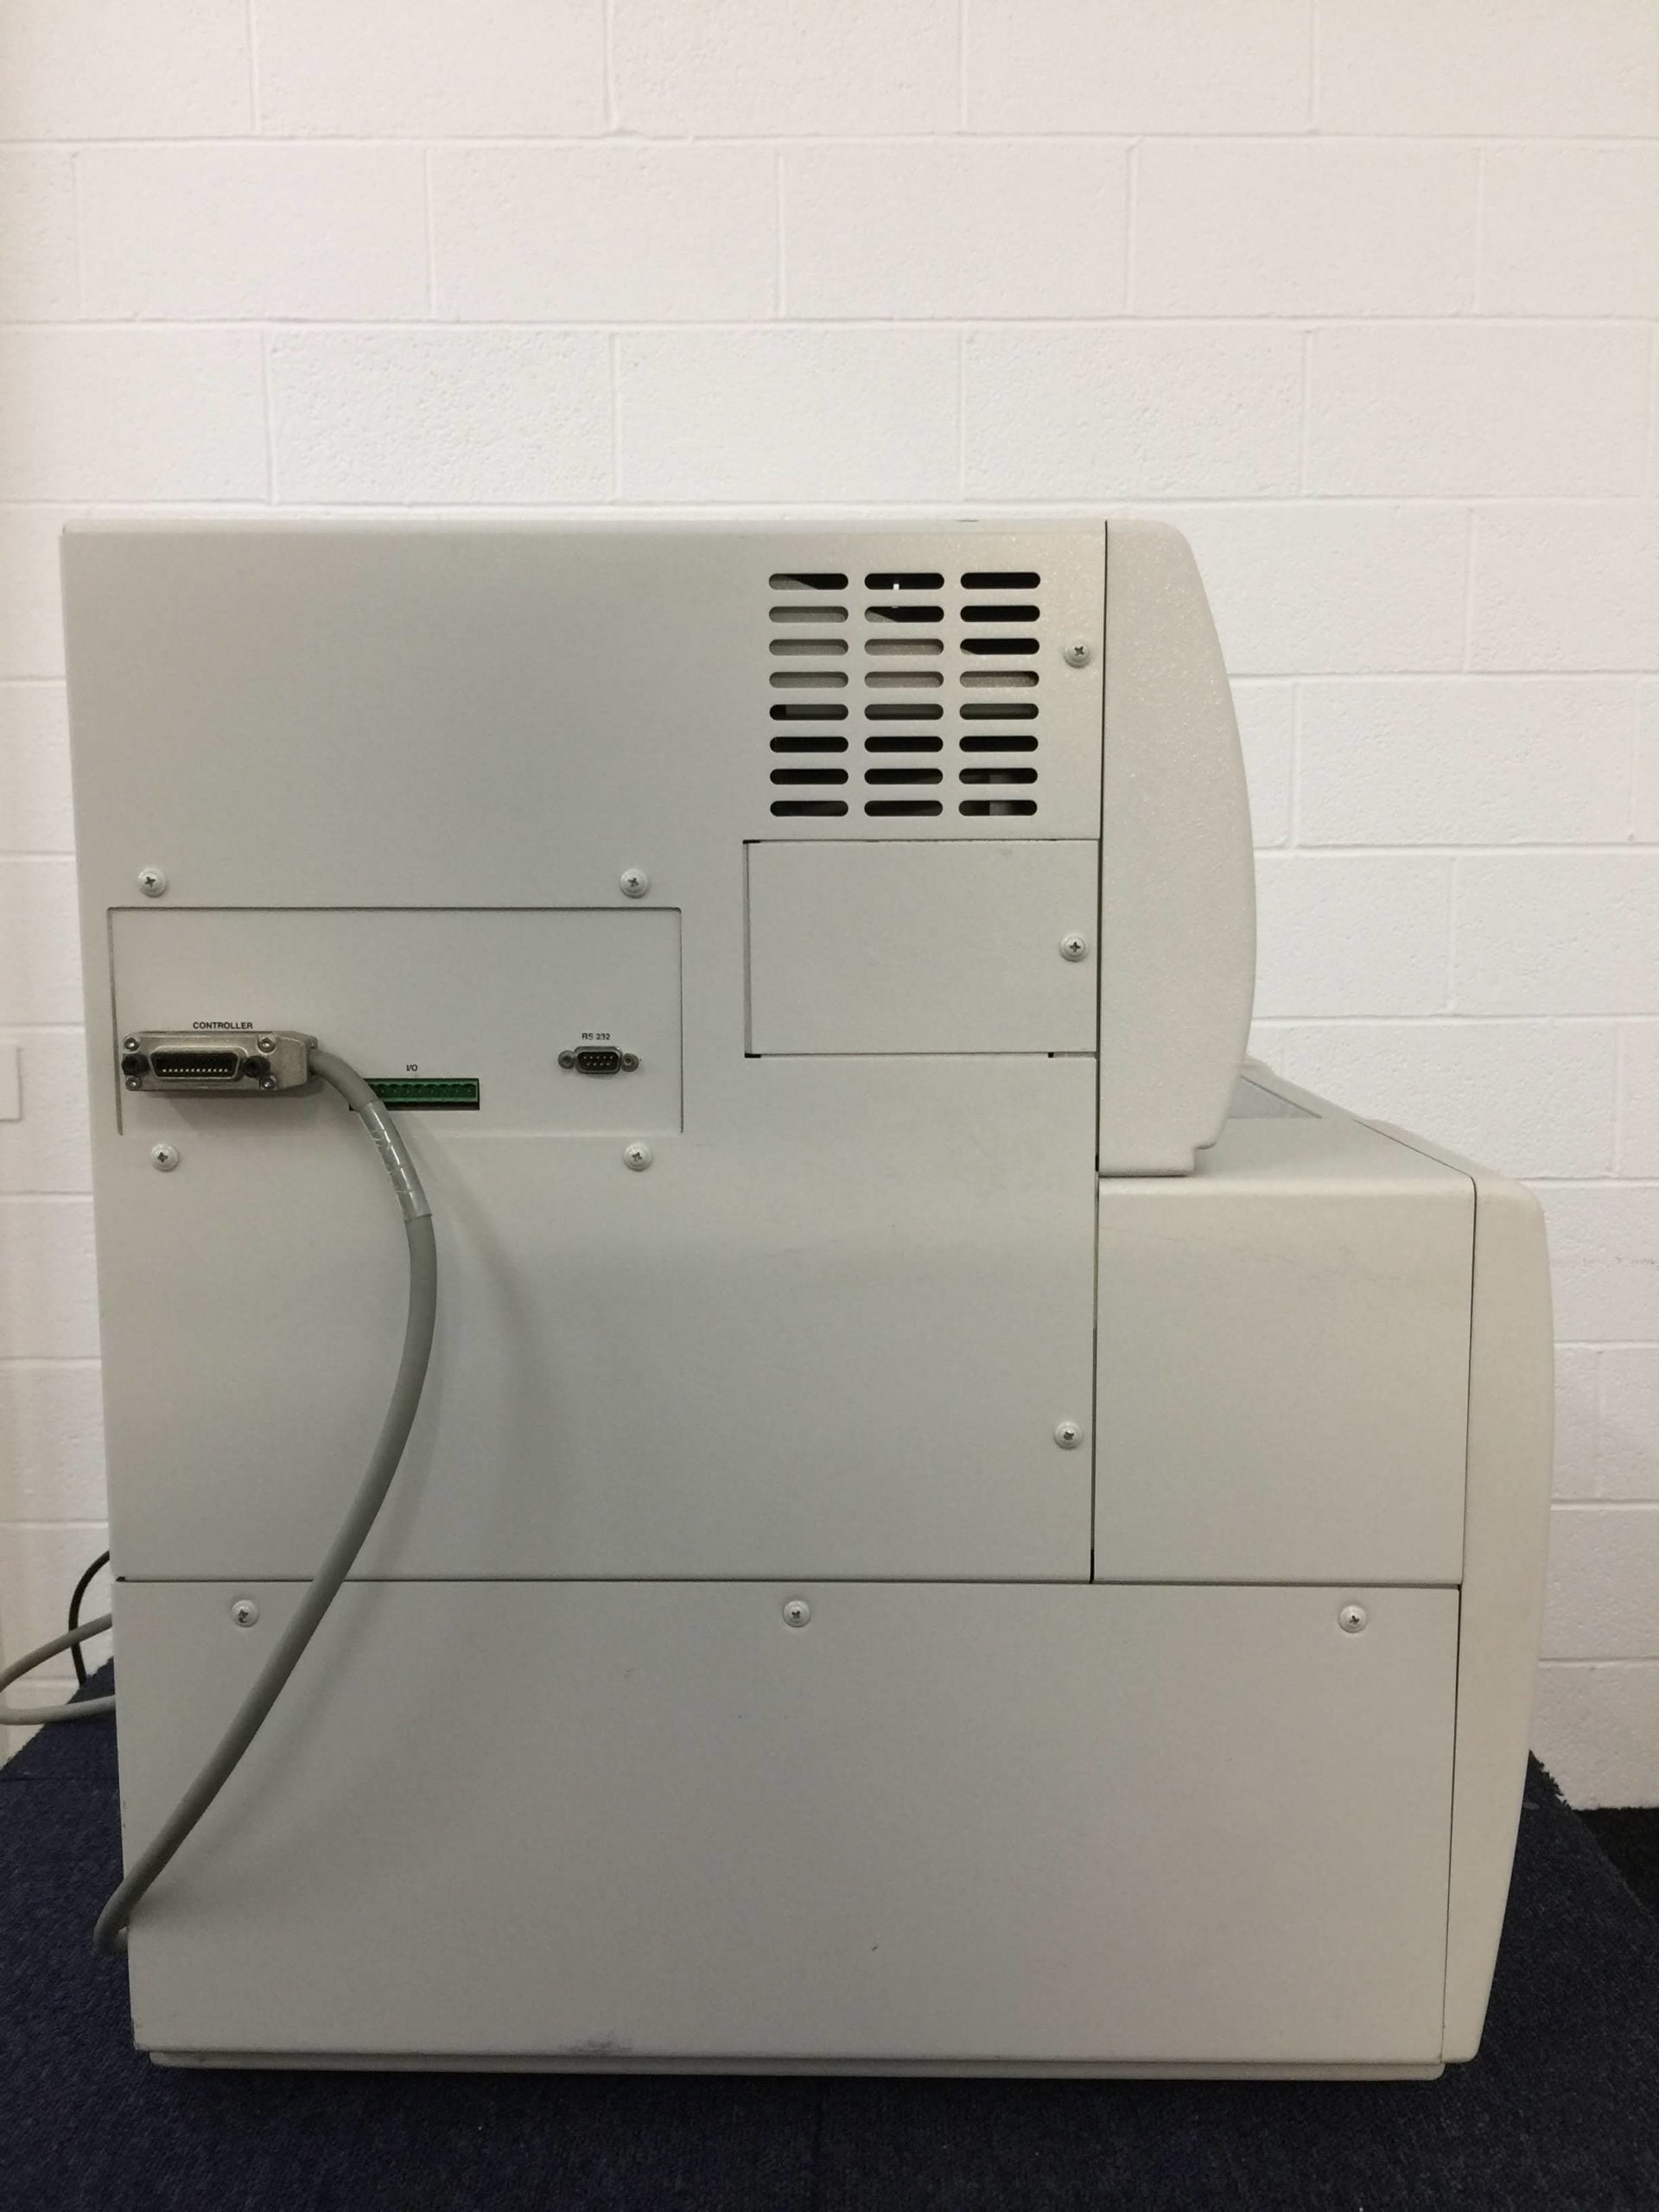 beckman coulter ceq 8000 genetic analysis system